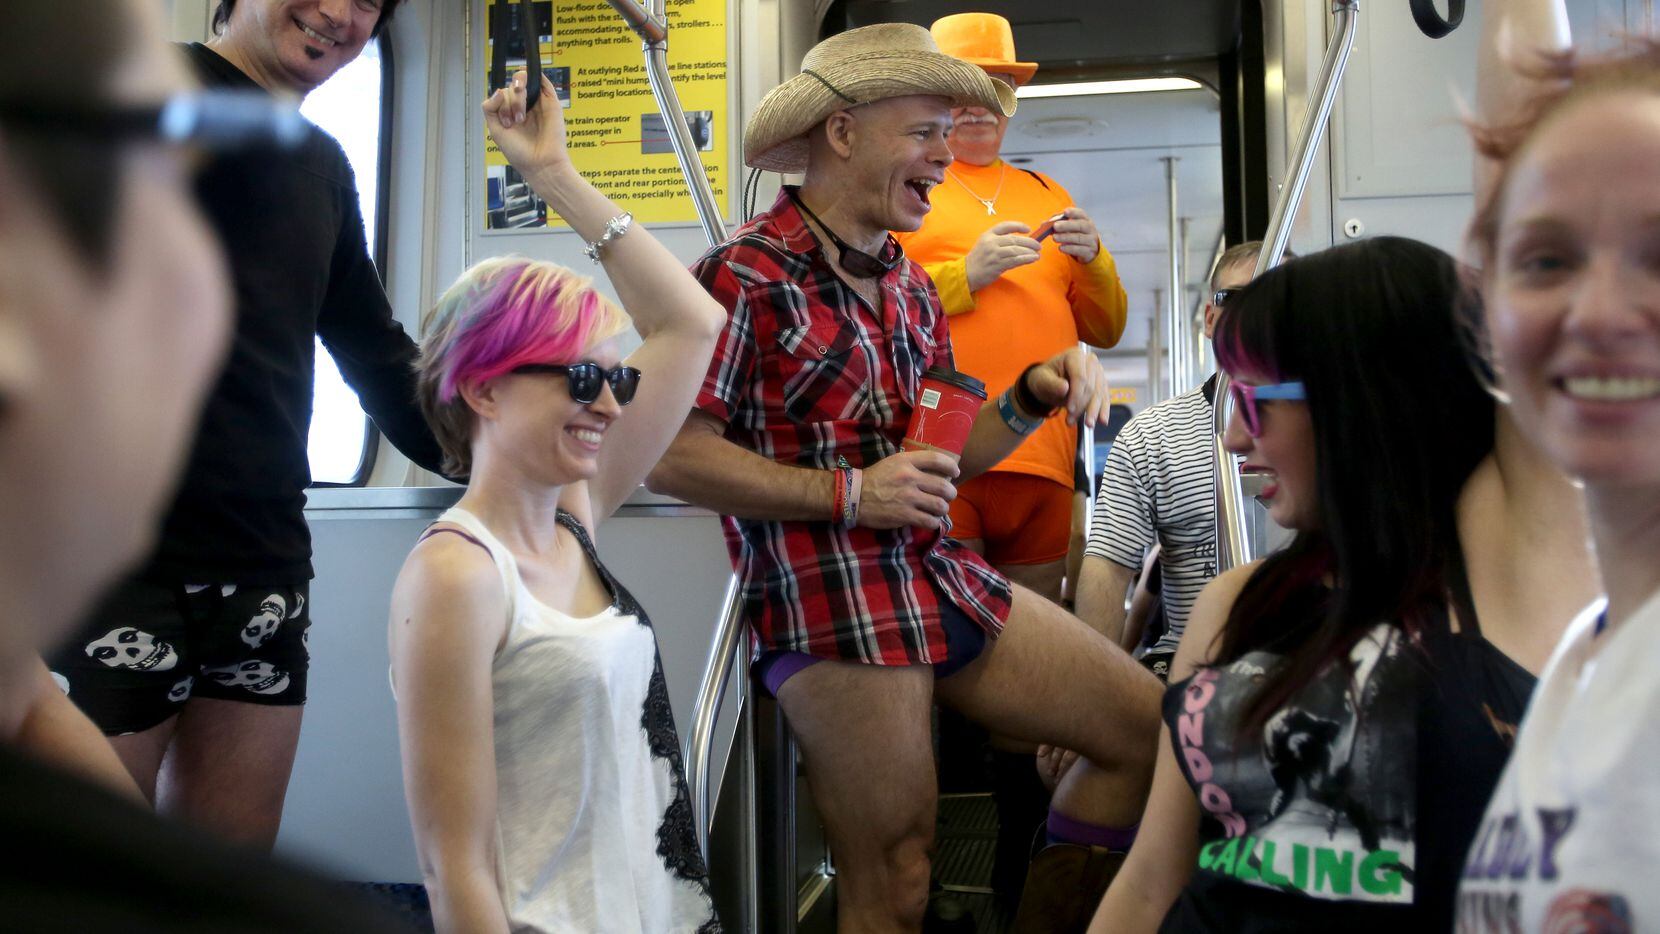 PICTURES: 60 countries participate in 'No Pants Subway Ride' day - P.M. News